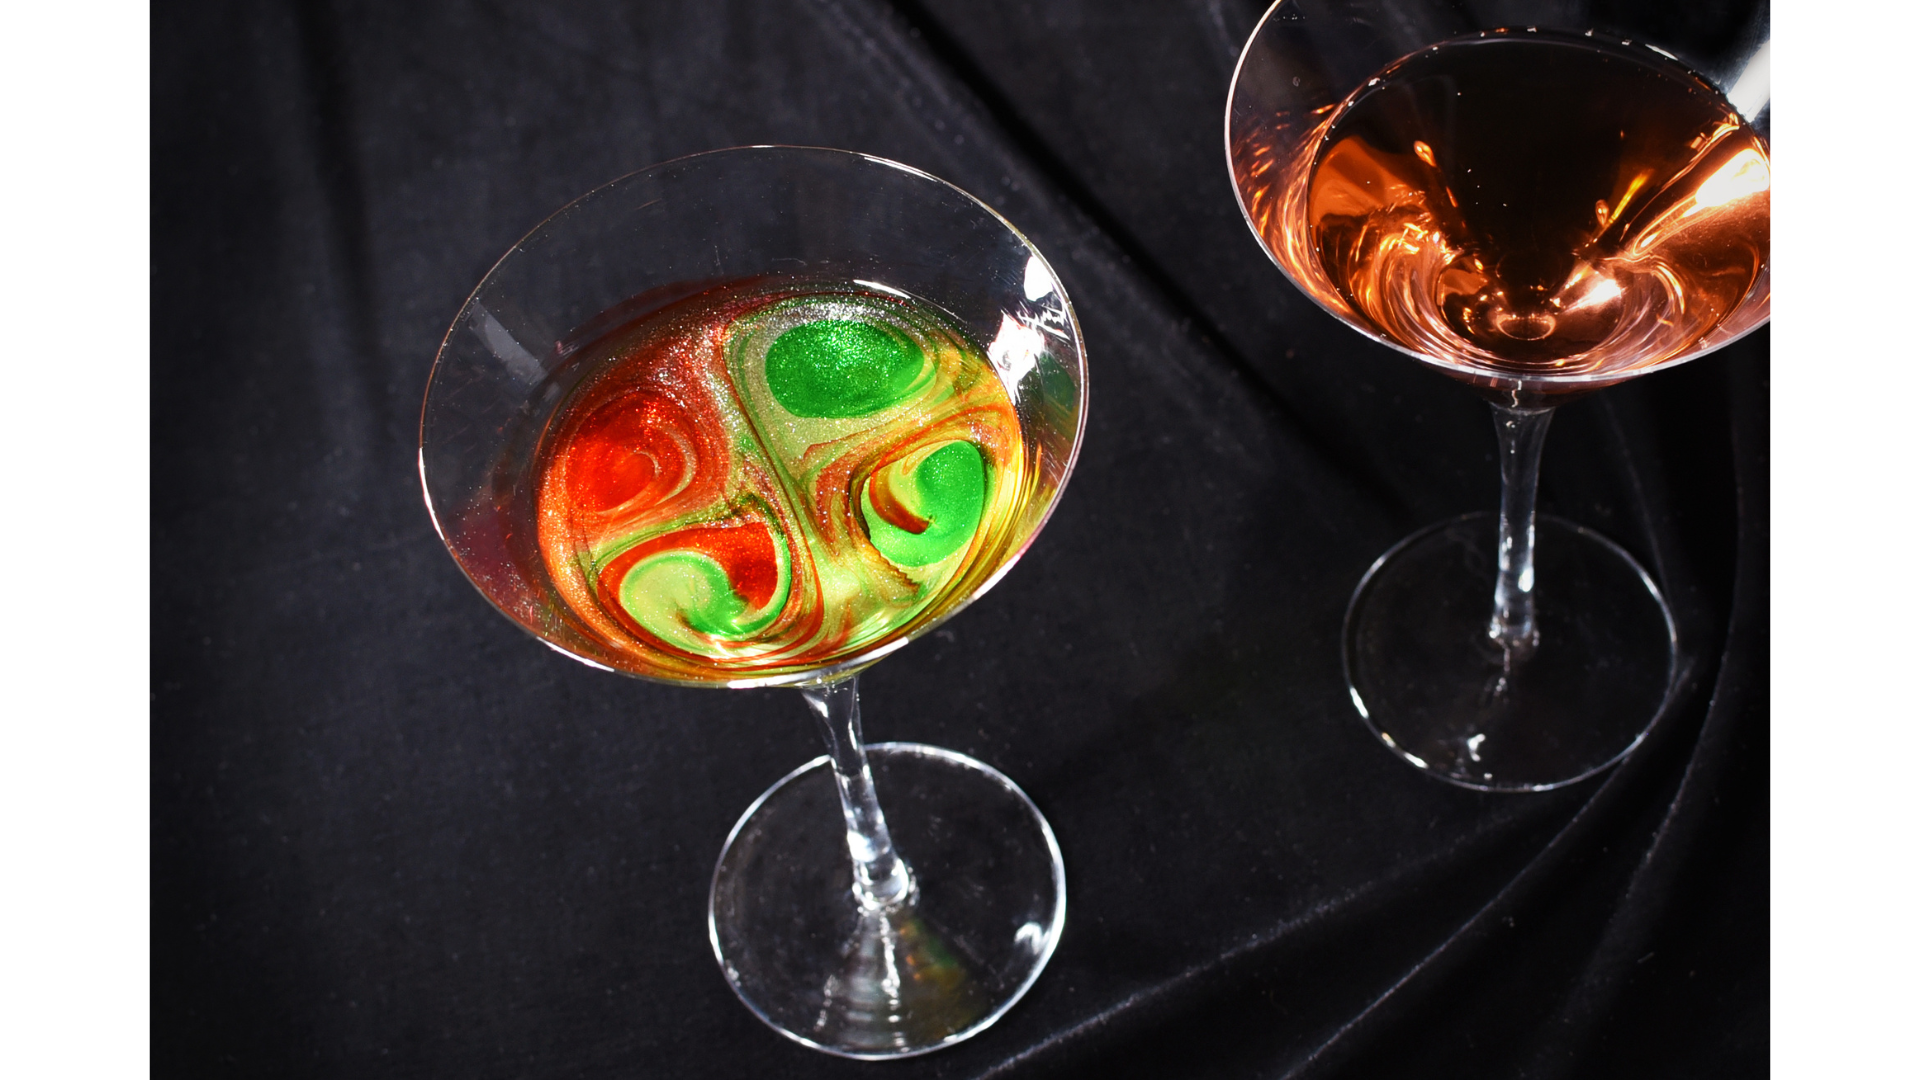 Zhao Pan's submission "Swirls in a martini glass"